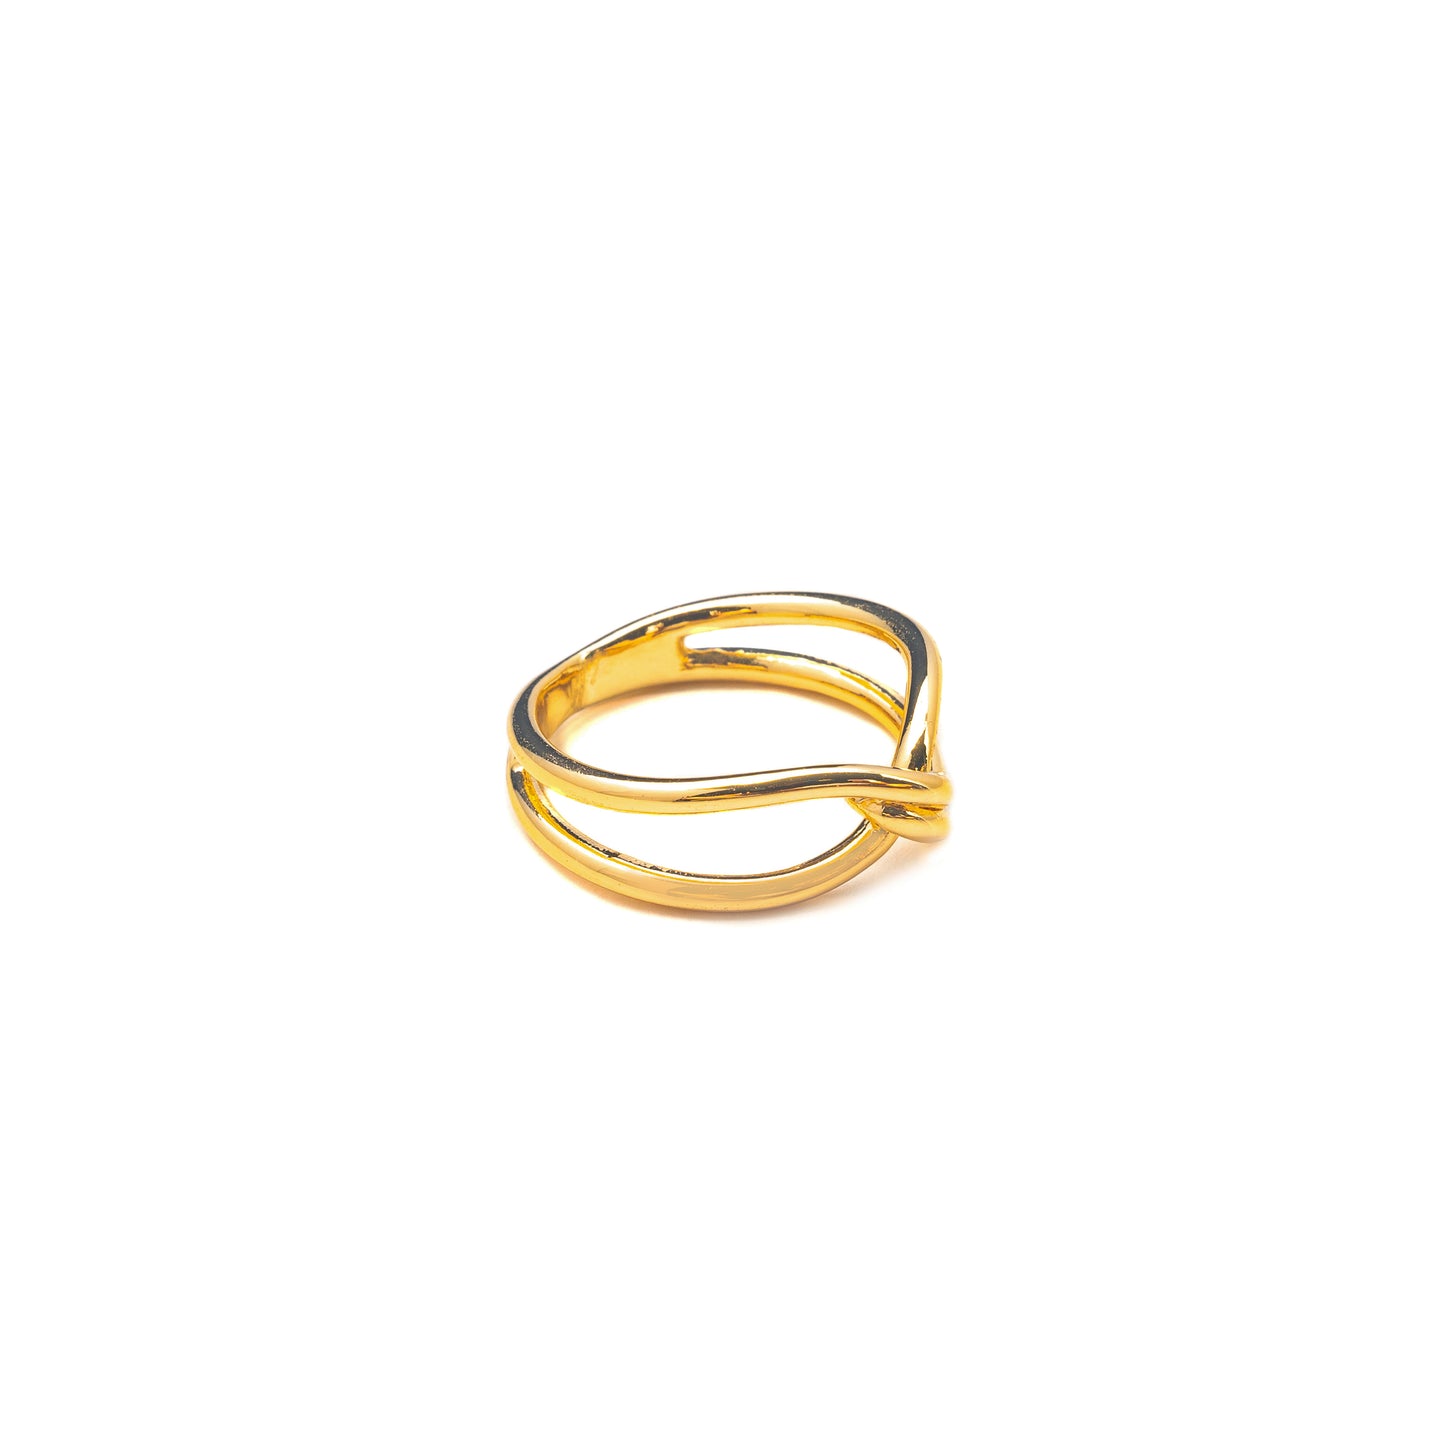 GOLD KNOT RING